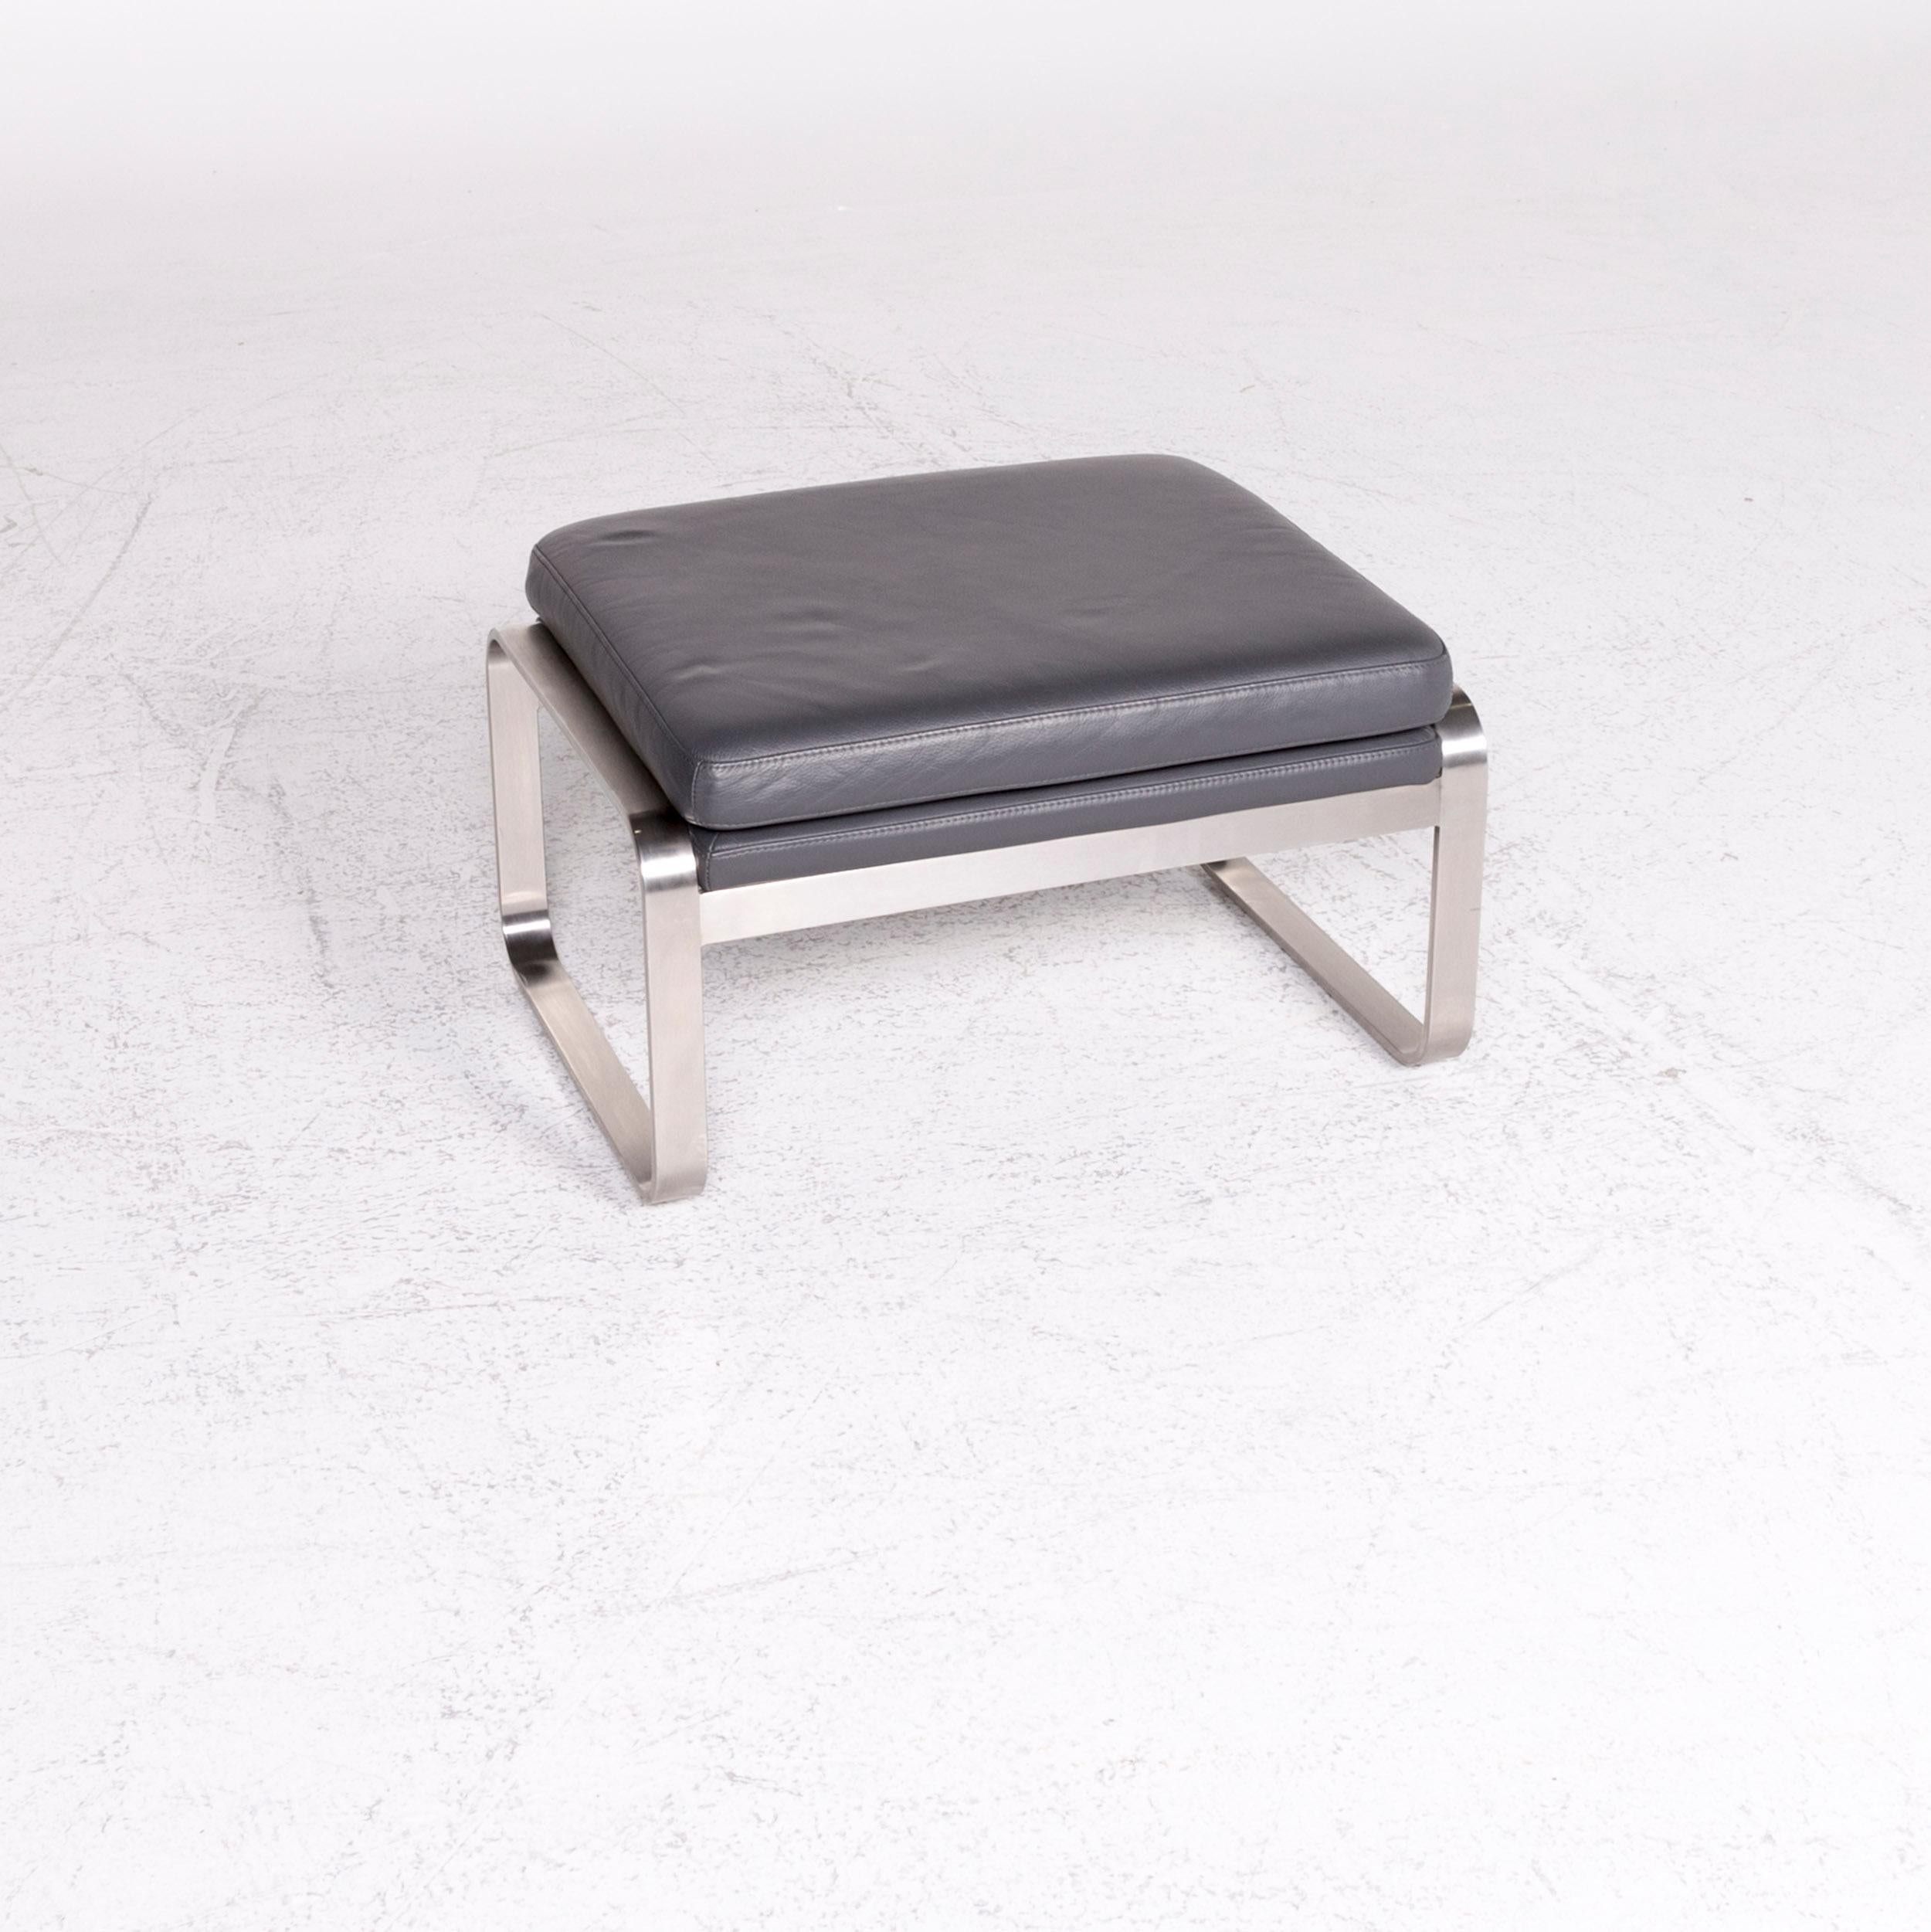 We bring to you a Rolf Benz Dono designer leather stool gray genuine leather stool.

Product measurements in centimeters:

Depth 51
Width 66
Height 39.






     